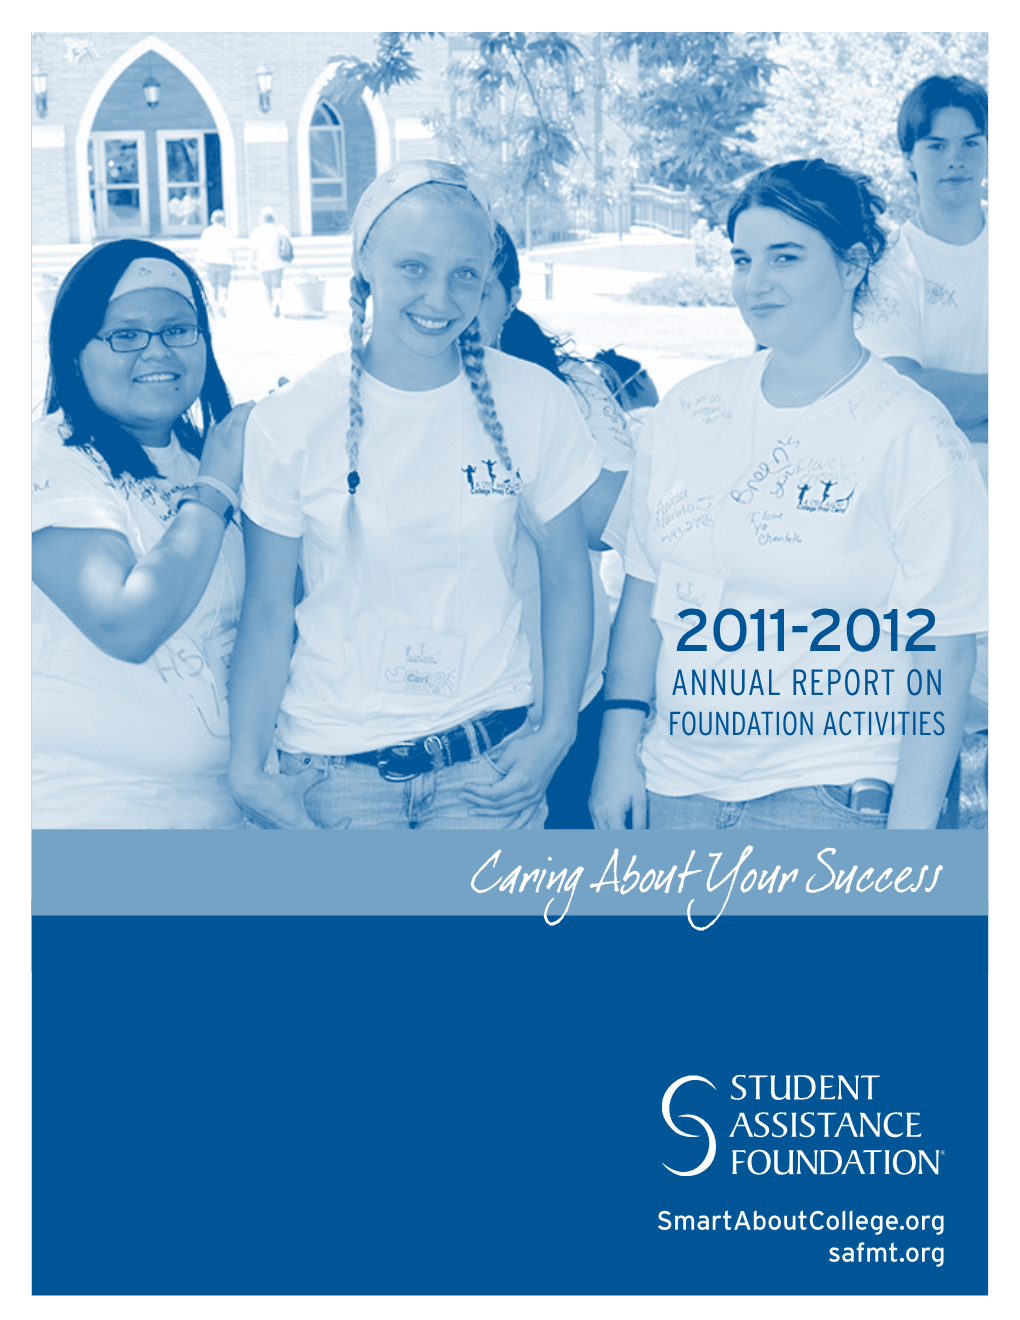 2011-2012 Annual Report on Foundation Activities